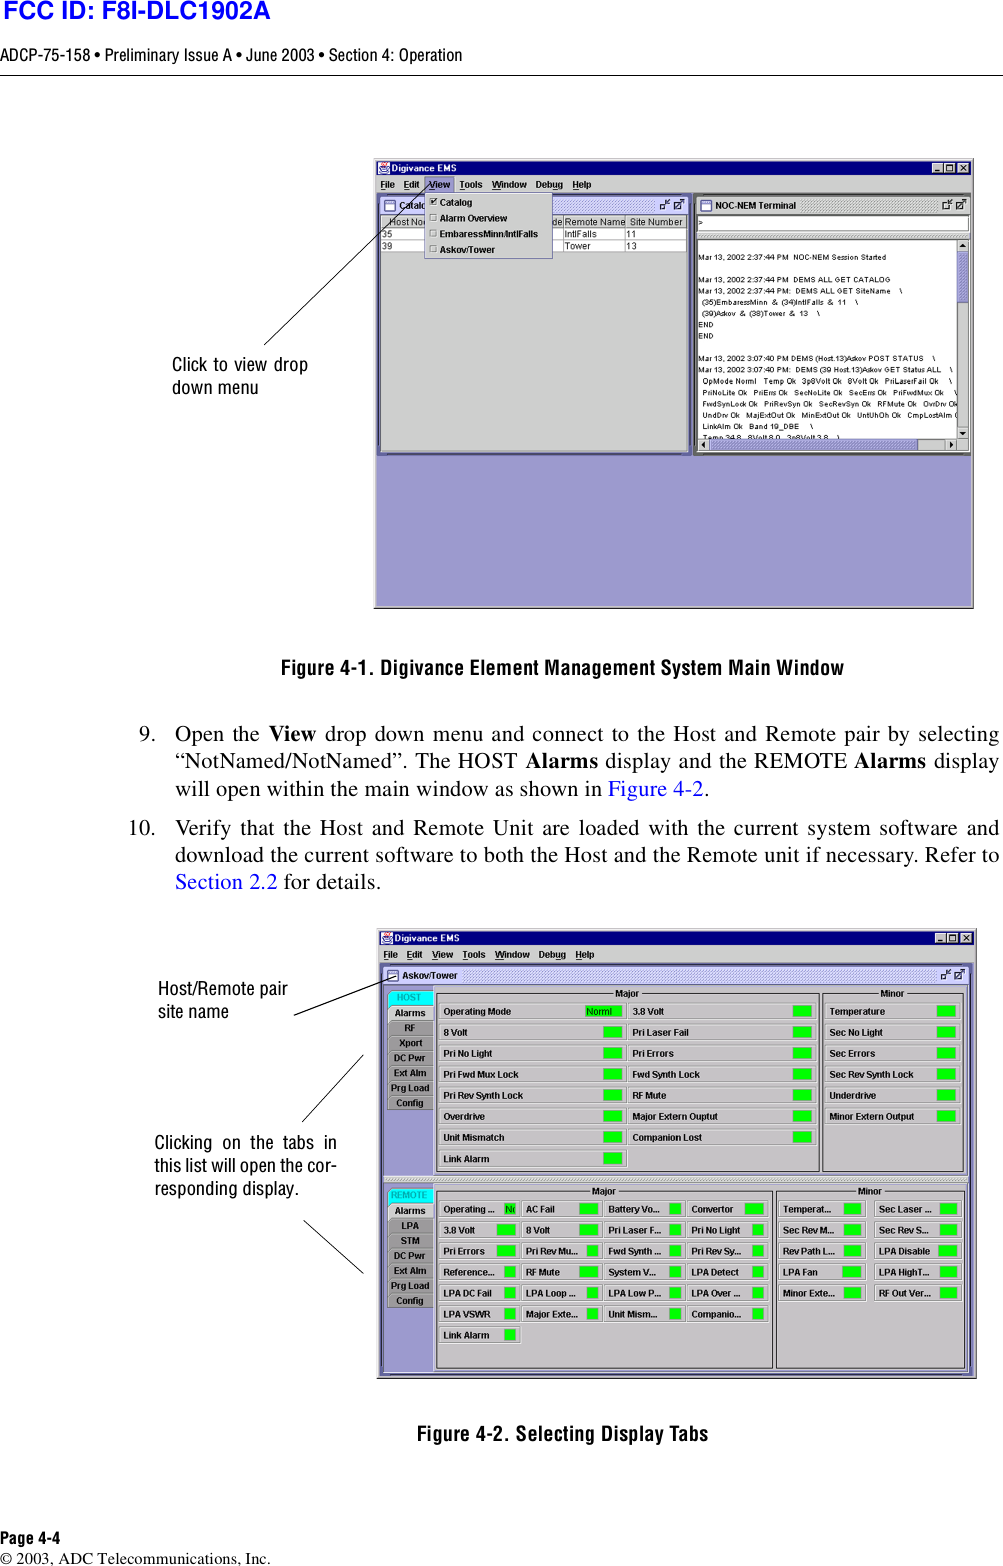 ADCP-75-158 • Preliminary Issue A • June 2003 • Section 4: OperationPage 4-4© 2003, ADC Telecommunications, Inc.Figure 4-1. Digivance Element Management System Main Window9. Open the View drop down menu and connect to the Host and Remote pair by selecting“NotNamed/NotNamed”. The HOST Alarms display and the REMOTE Alarms displaywill open within the main window as shown in Figure 4-2. 10. Verify that the Host and Remote Unit are loaded with the current system software anddownload the current software to both the Host and the Remote unit if necessary. Refer toSection 2.2 for details. Figure 4-2. Selecting Display TabsClick to view dropdown menuClicking on the tabs inthis list will open the cor-responding display.Host/Remote pairsite nameFCC ID: F8I-DLC1902A